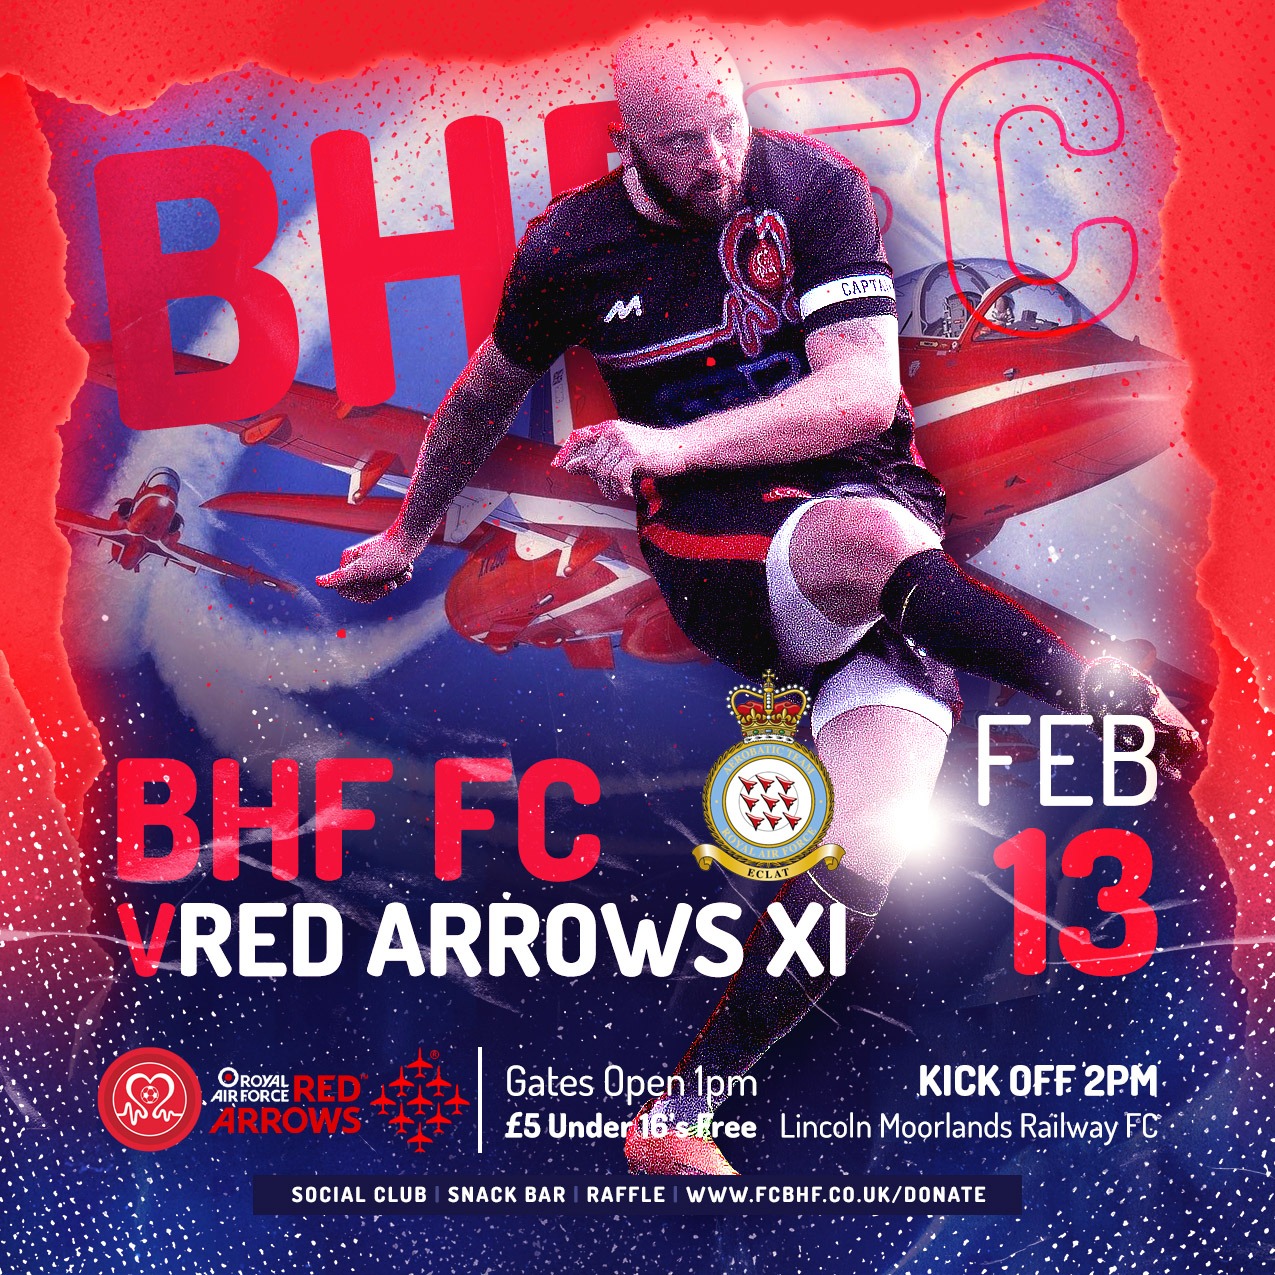 The game will be staged at Lincoln Moorlands Railway Sports & Social Club on February 13 at 2pm.